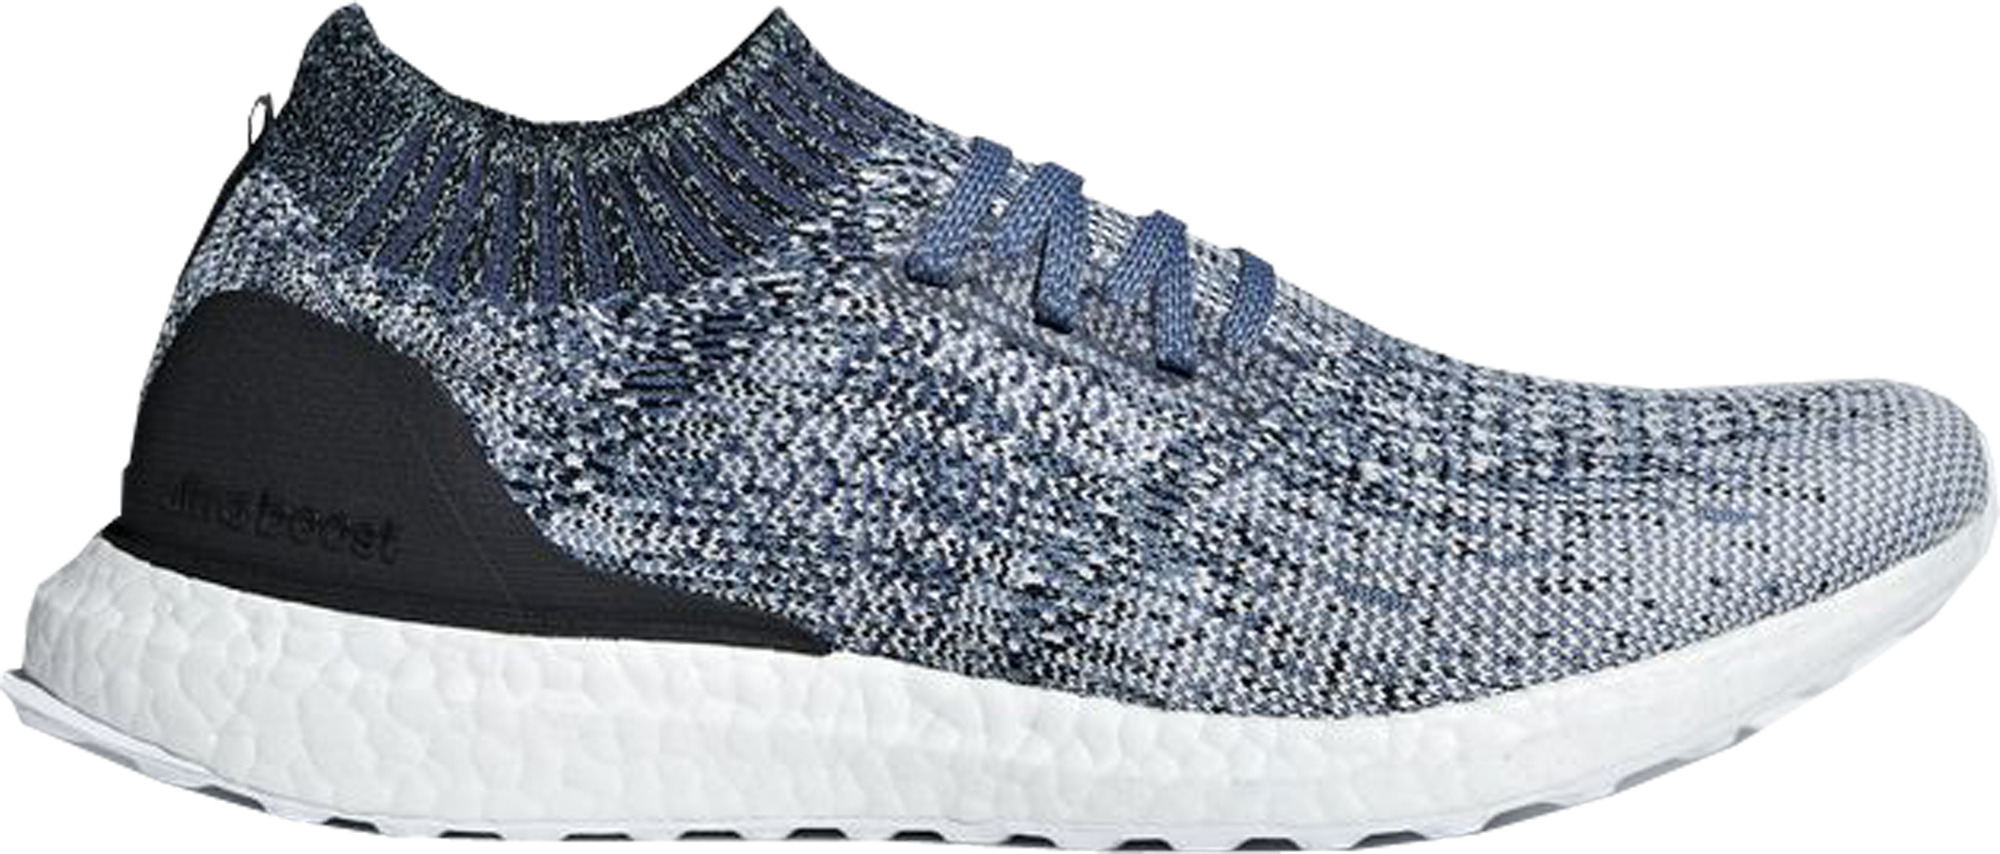 new ultra boost uncaged